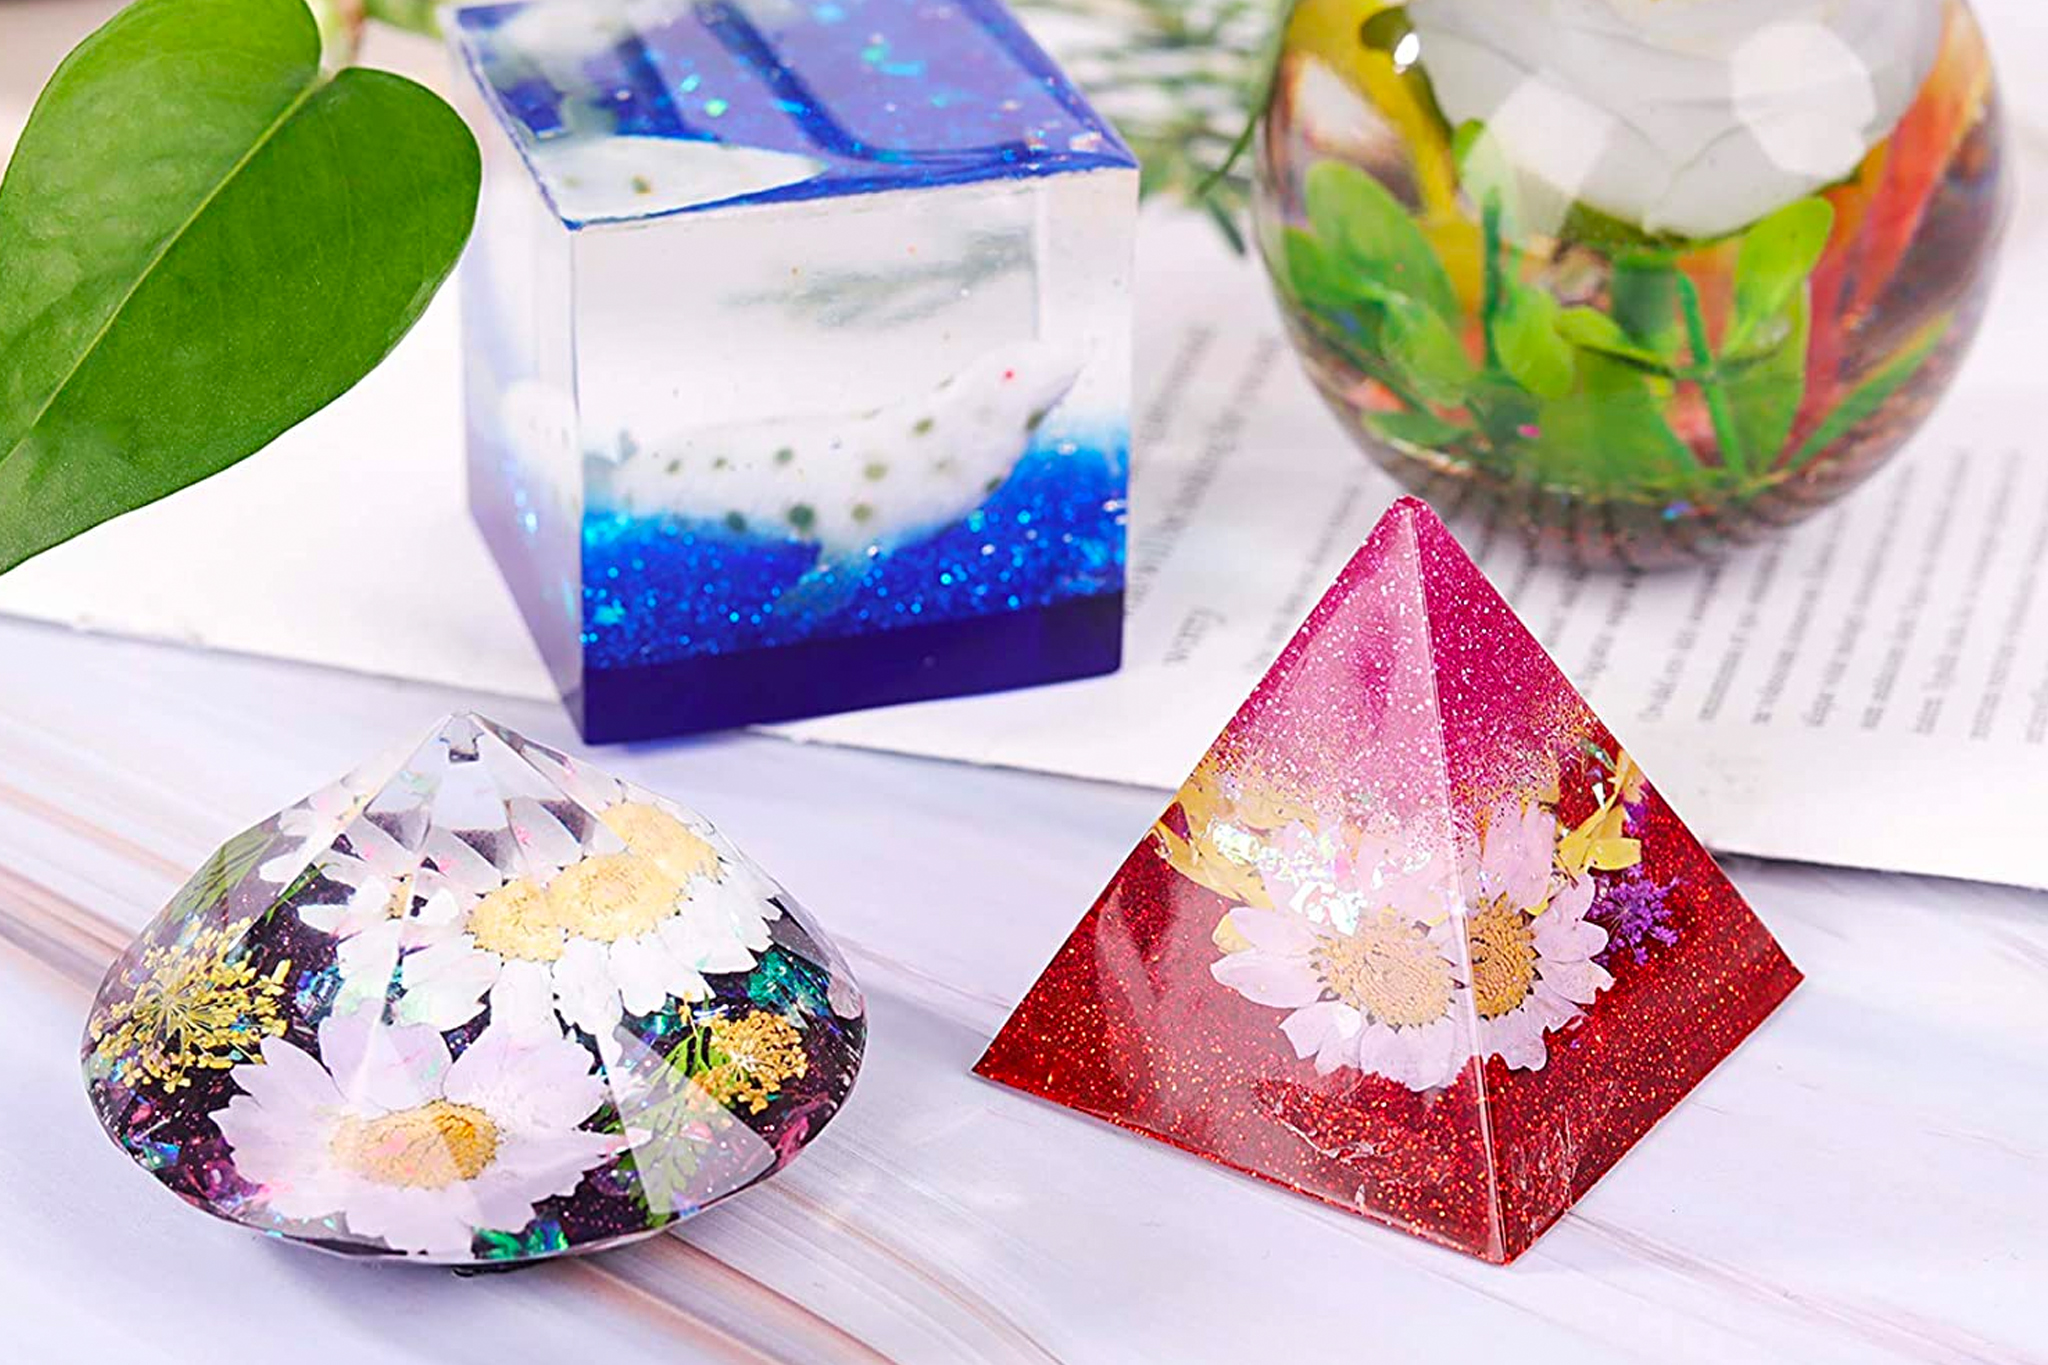 Resin Art For Beginners: Learn How to Make Your Own Resin Art